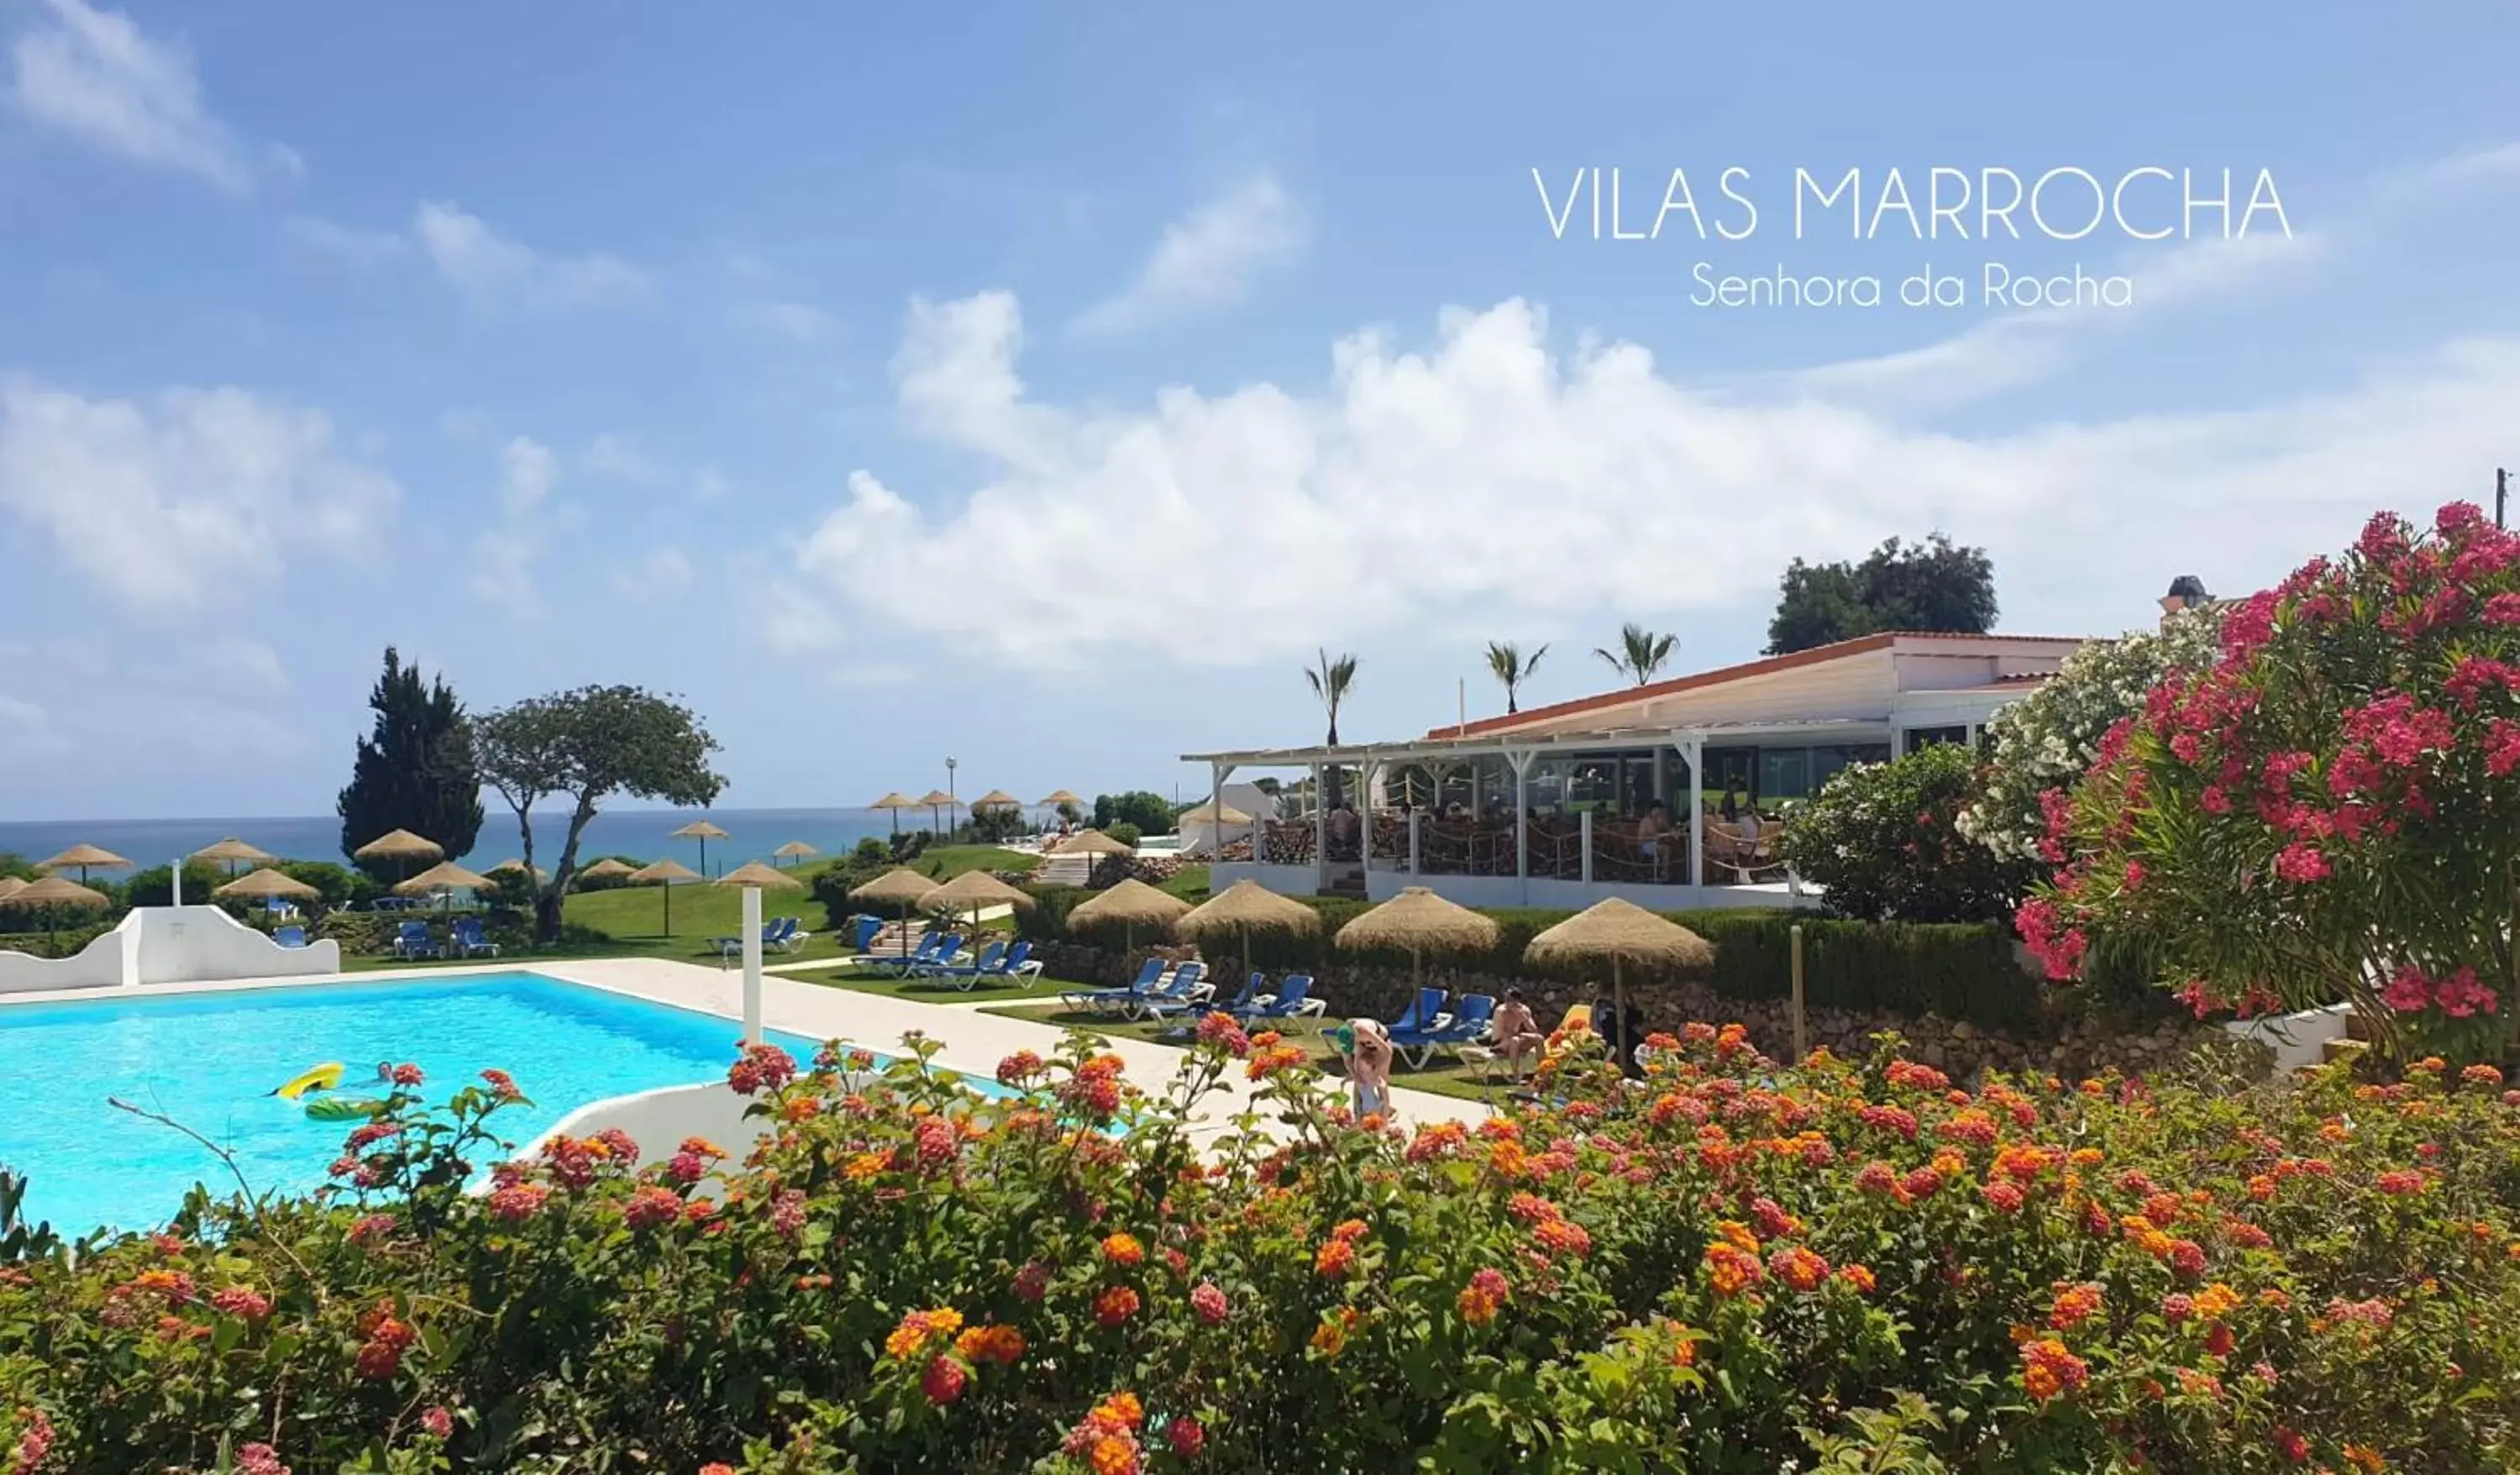 Restaurant/places to eat, Swimming Pool in Vilas Marrocha